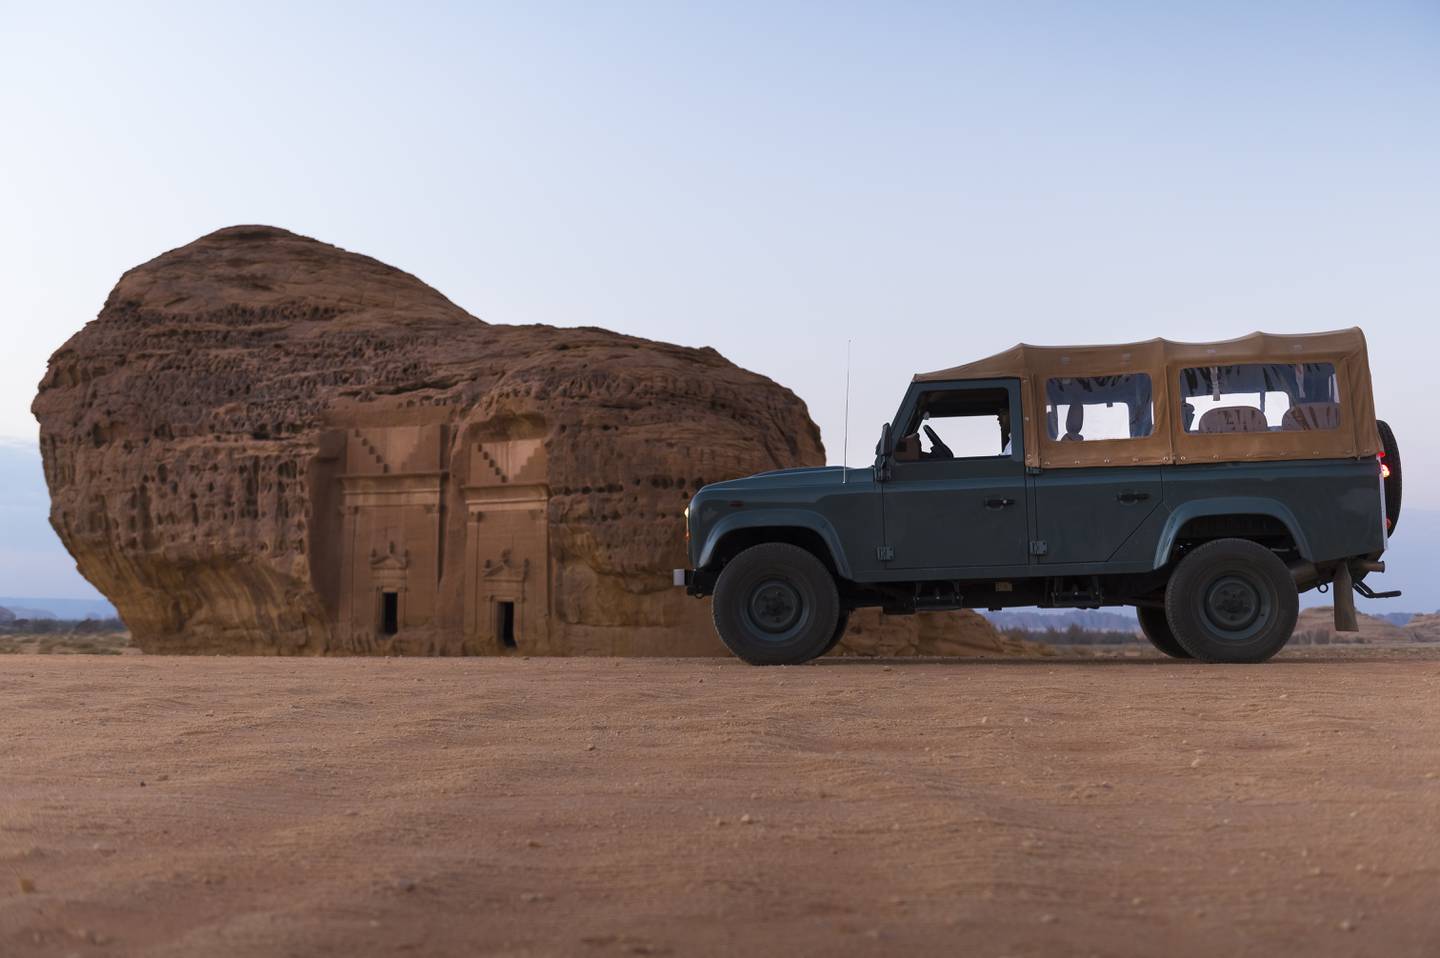 Hegra, a Unesco World Heritage site in AlUla. Photo: Flynas